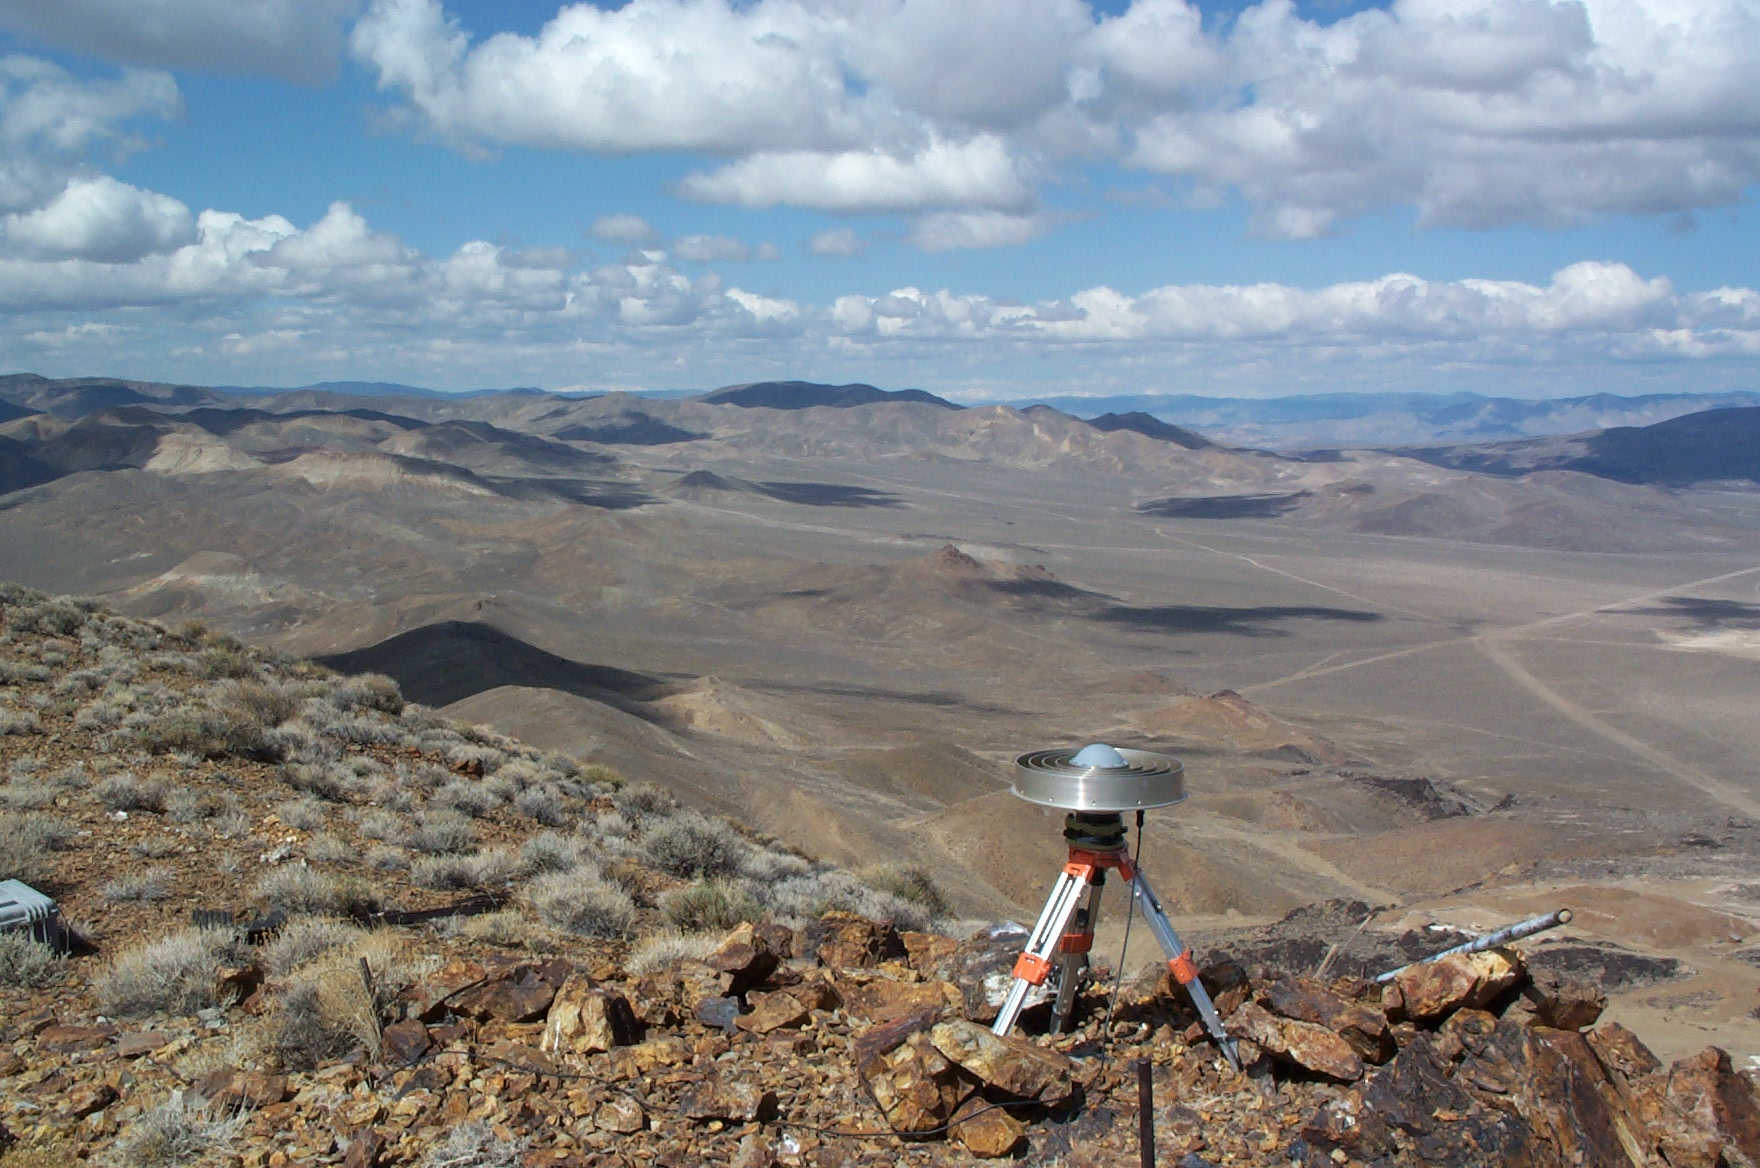 GPS Station CAND. Located at the Candaleria silver mine near Mina, Nevada.